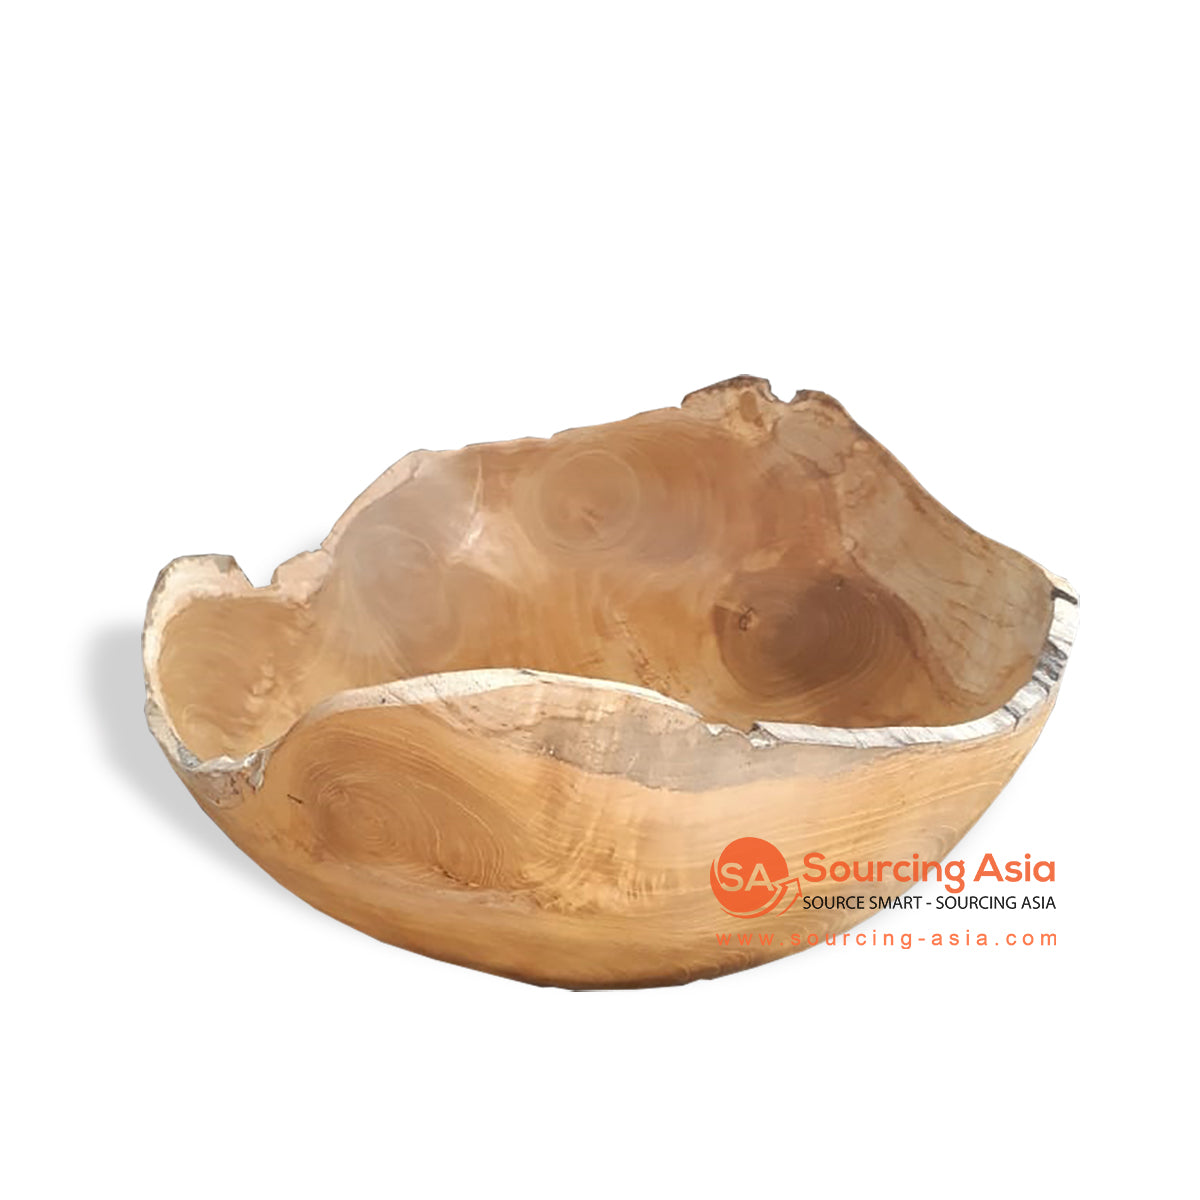 BMW123-5 BLEACHED TEAK WOOD BOWL WITH NATURAL EDGE